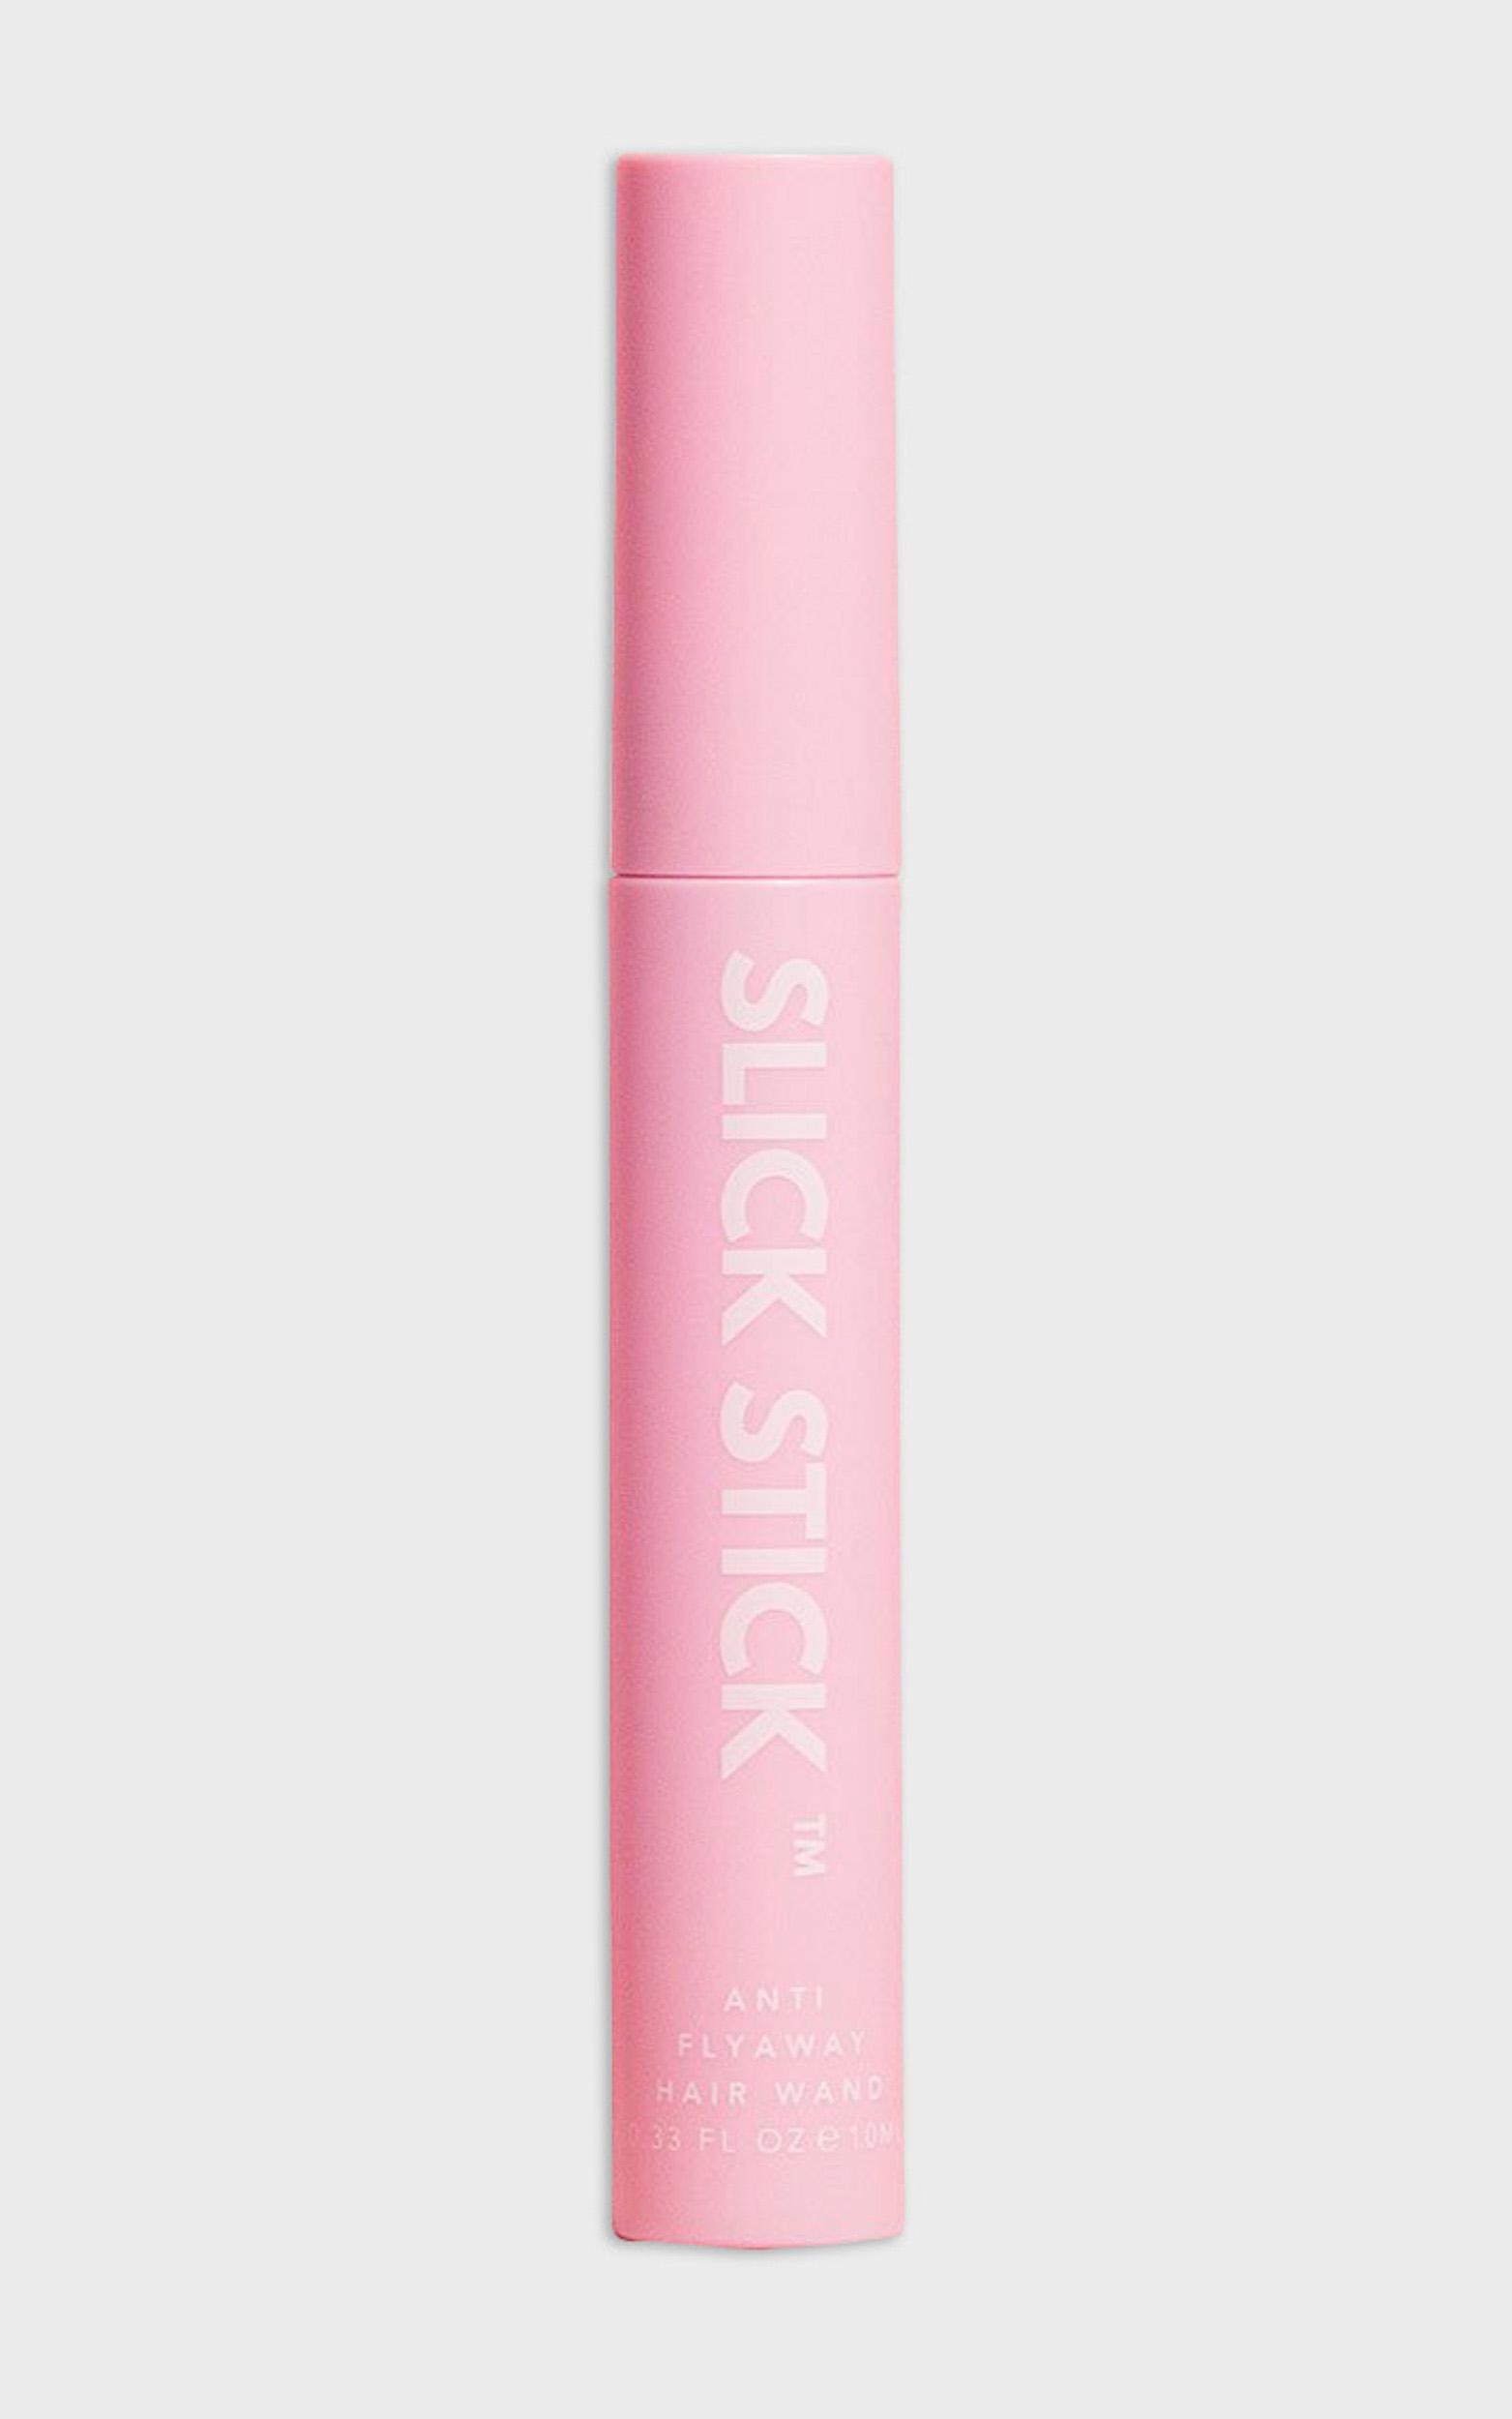 Slick Stick Hair Wand in Pink, , hi-res image number null